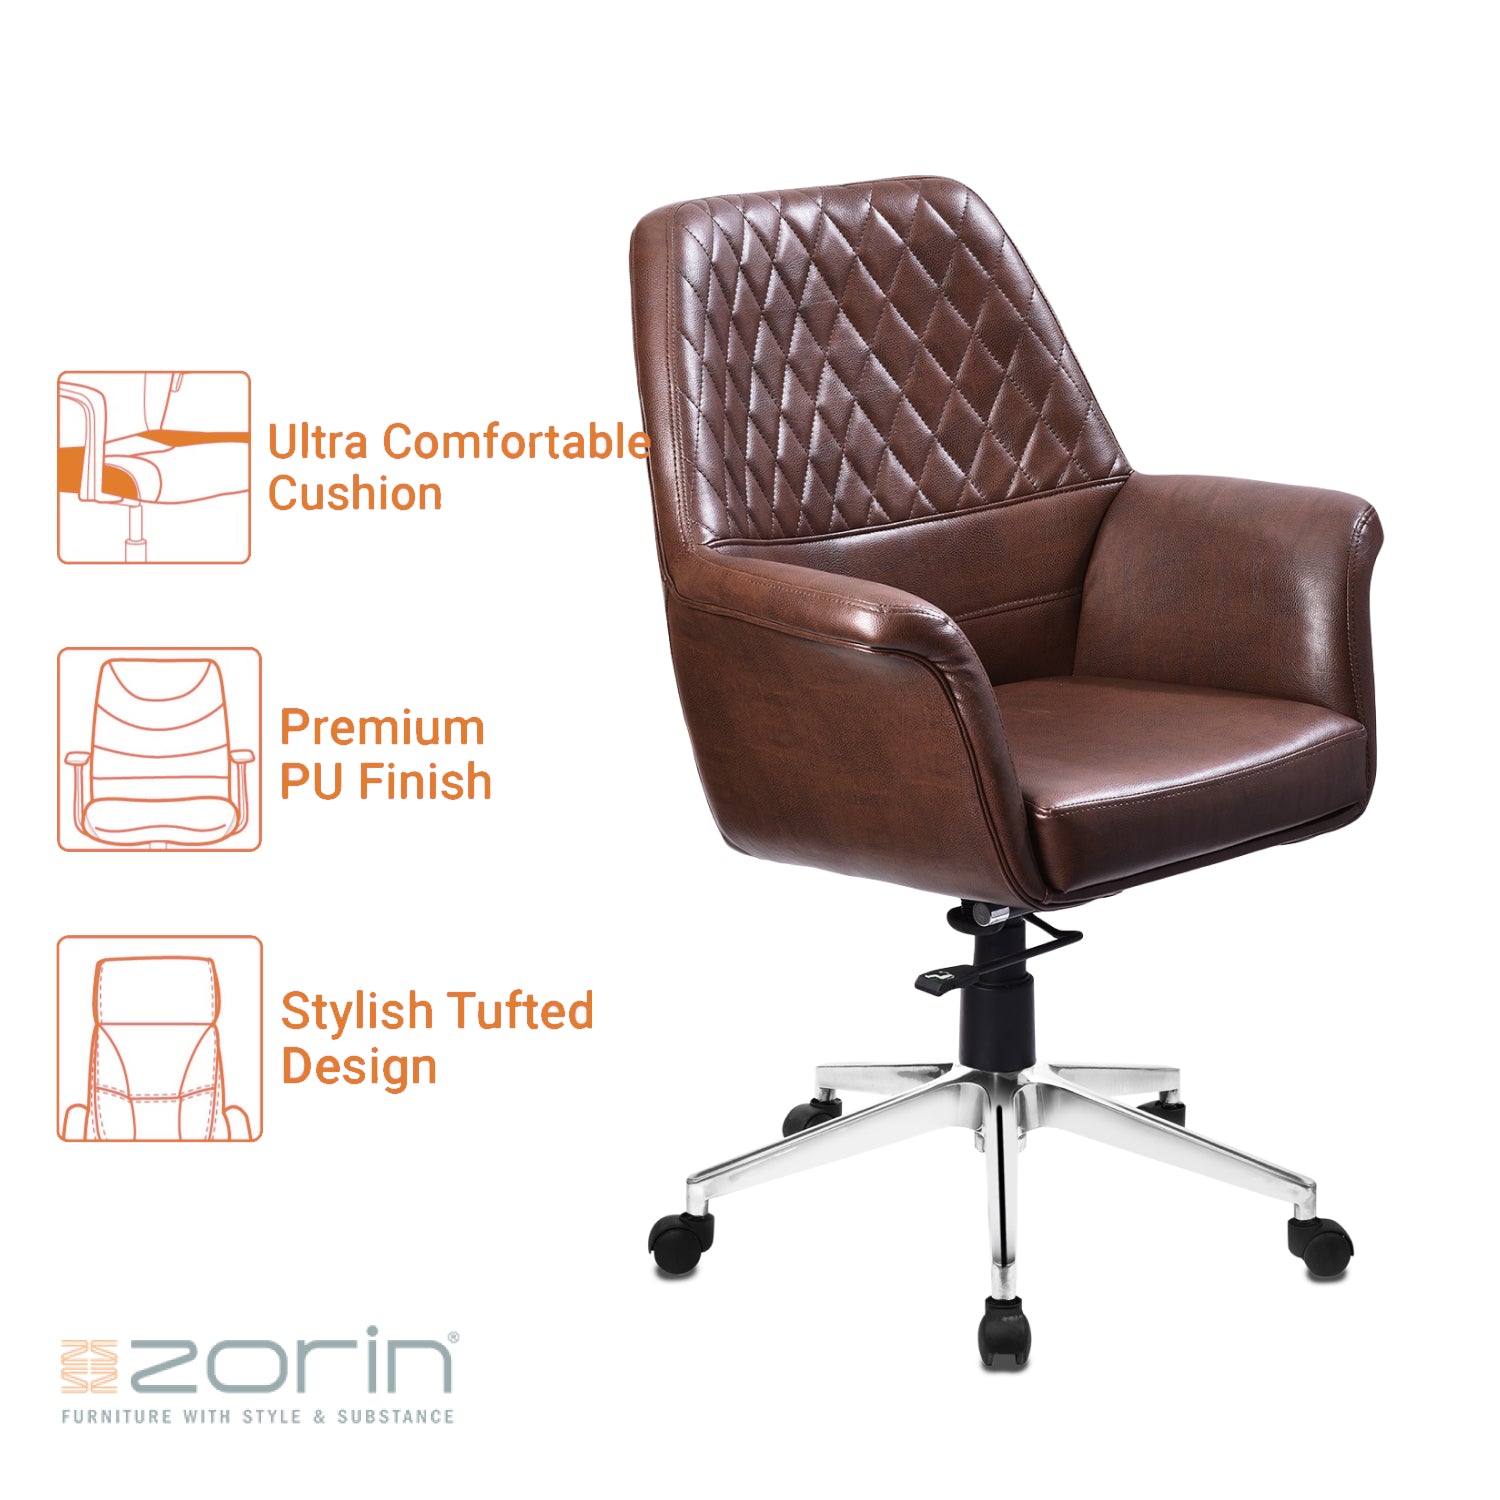 ZFB1006 Medium Back Chair by Zorin in Brown Color Zorin